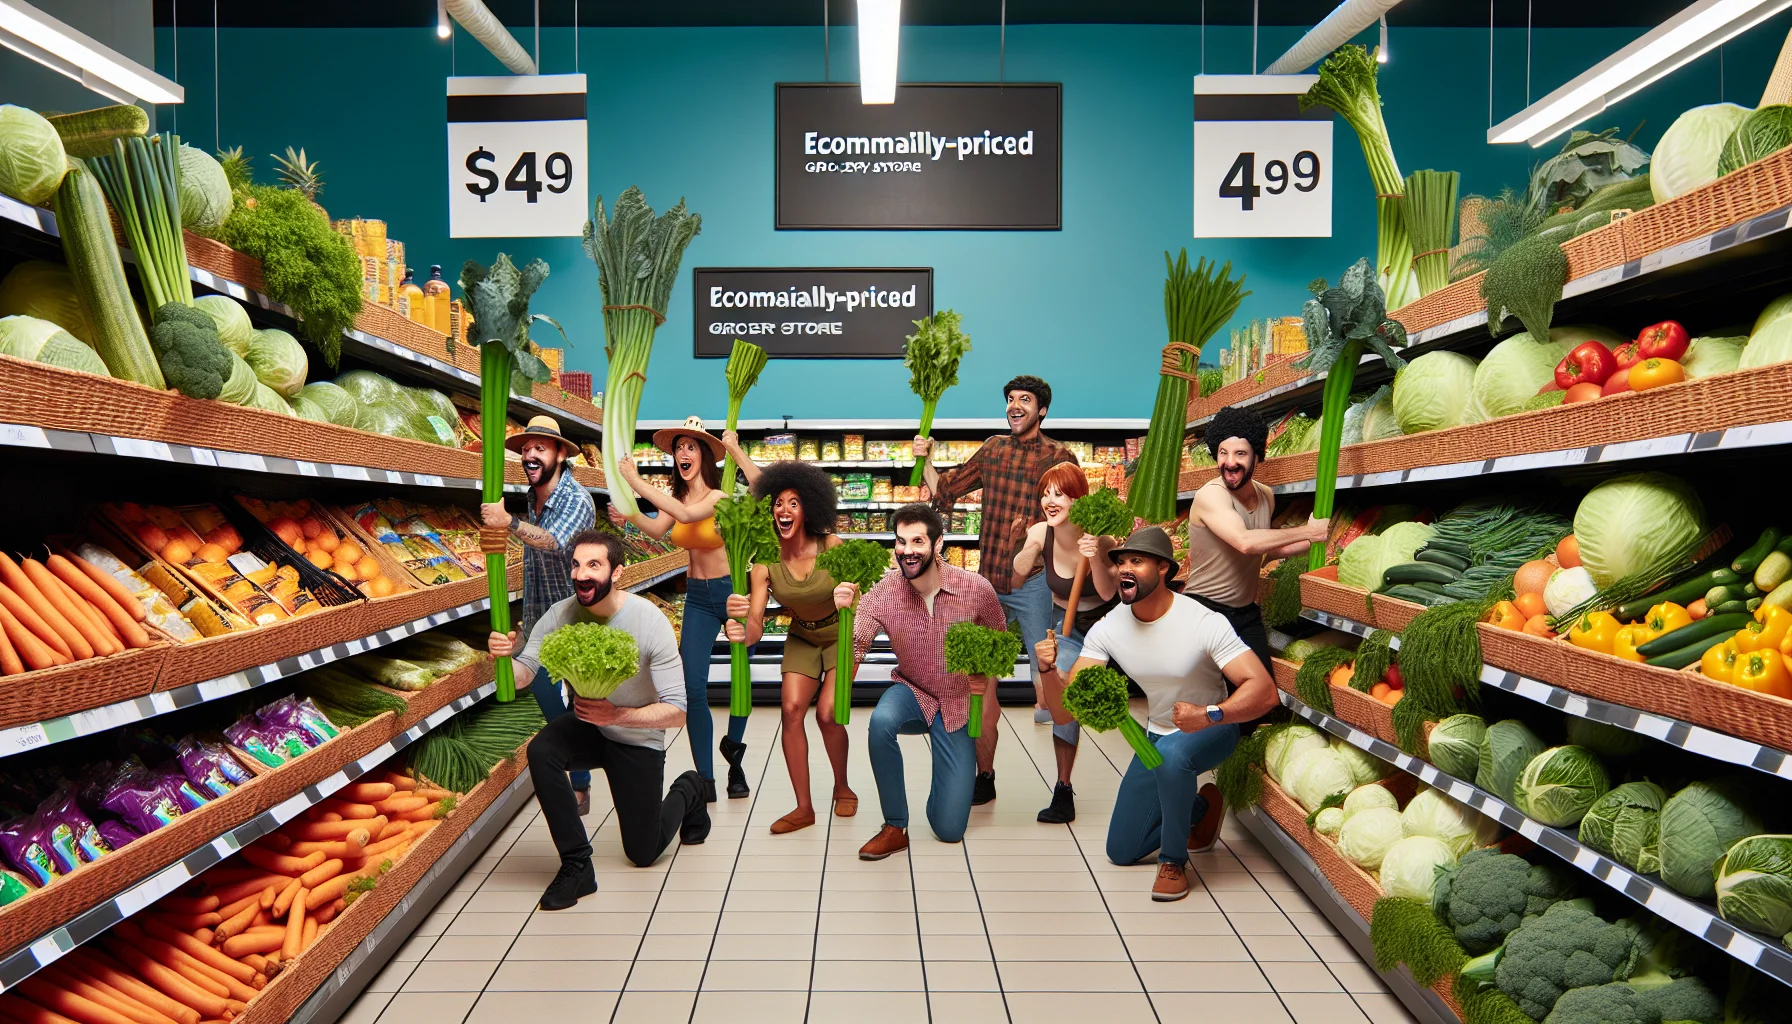 Create a hilarious scene at an economically-priced grocery store. The shelves are lined with low-cost but nutrition-rich products. The customers, representing a diverse array of descents such as Caucasian, Hispanic, Black, Middle-Eastern, and South Asian all showcasing different genders, are engaging in a healthy treasure hunt, seeking out the most nutritious food for a bargain. Some customers are even humorously using vegetable stalks as swords or adorning their heads with lettuce as helmets, reflecting their excitement and joy in this food oasis.